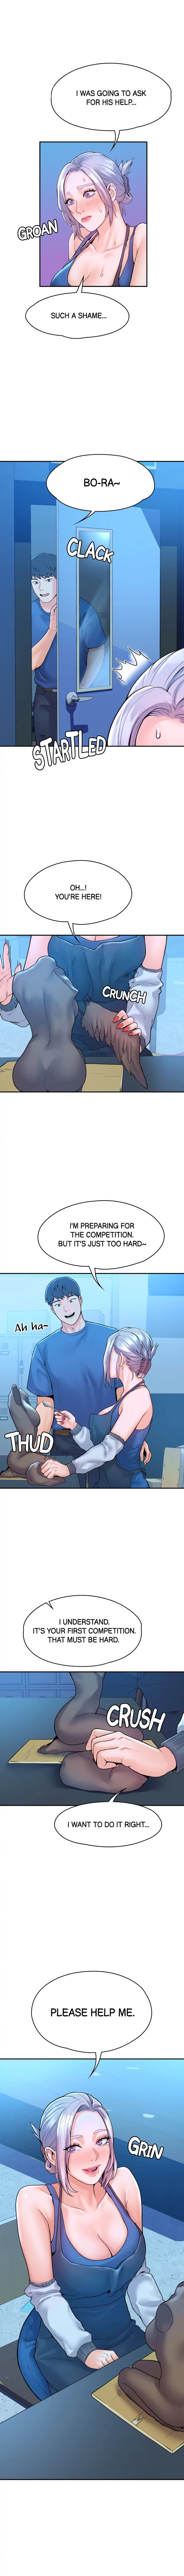 campus-today-chap-41-0